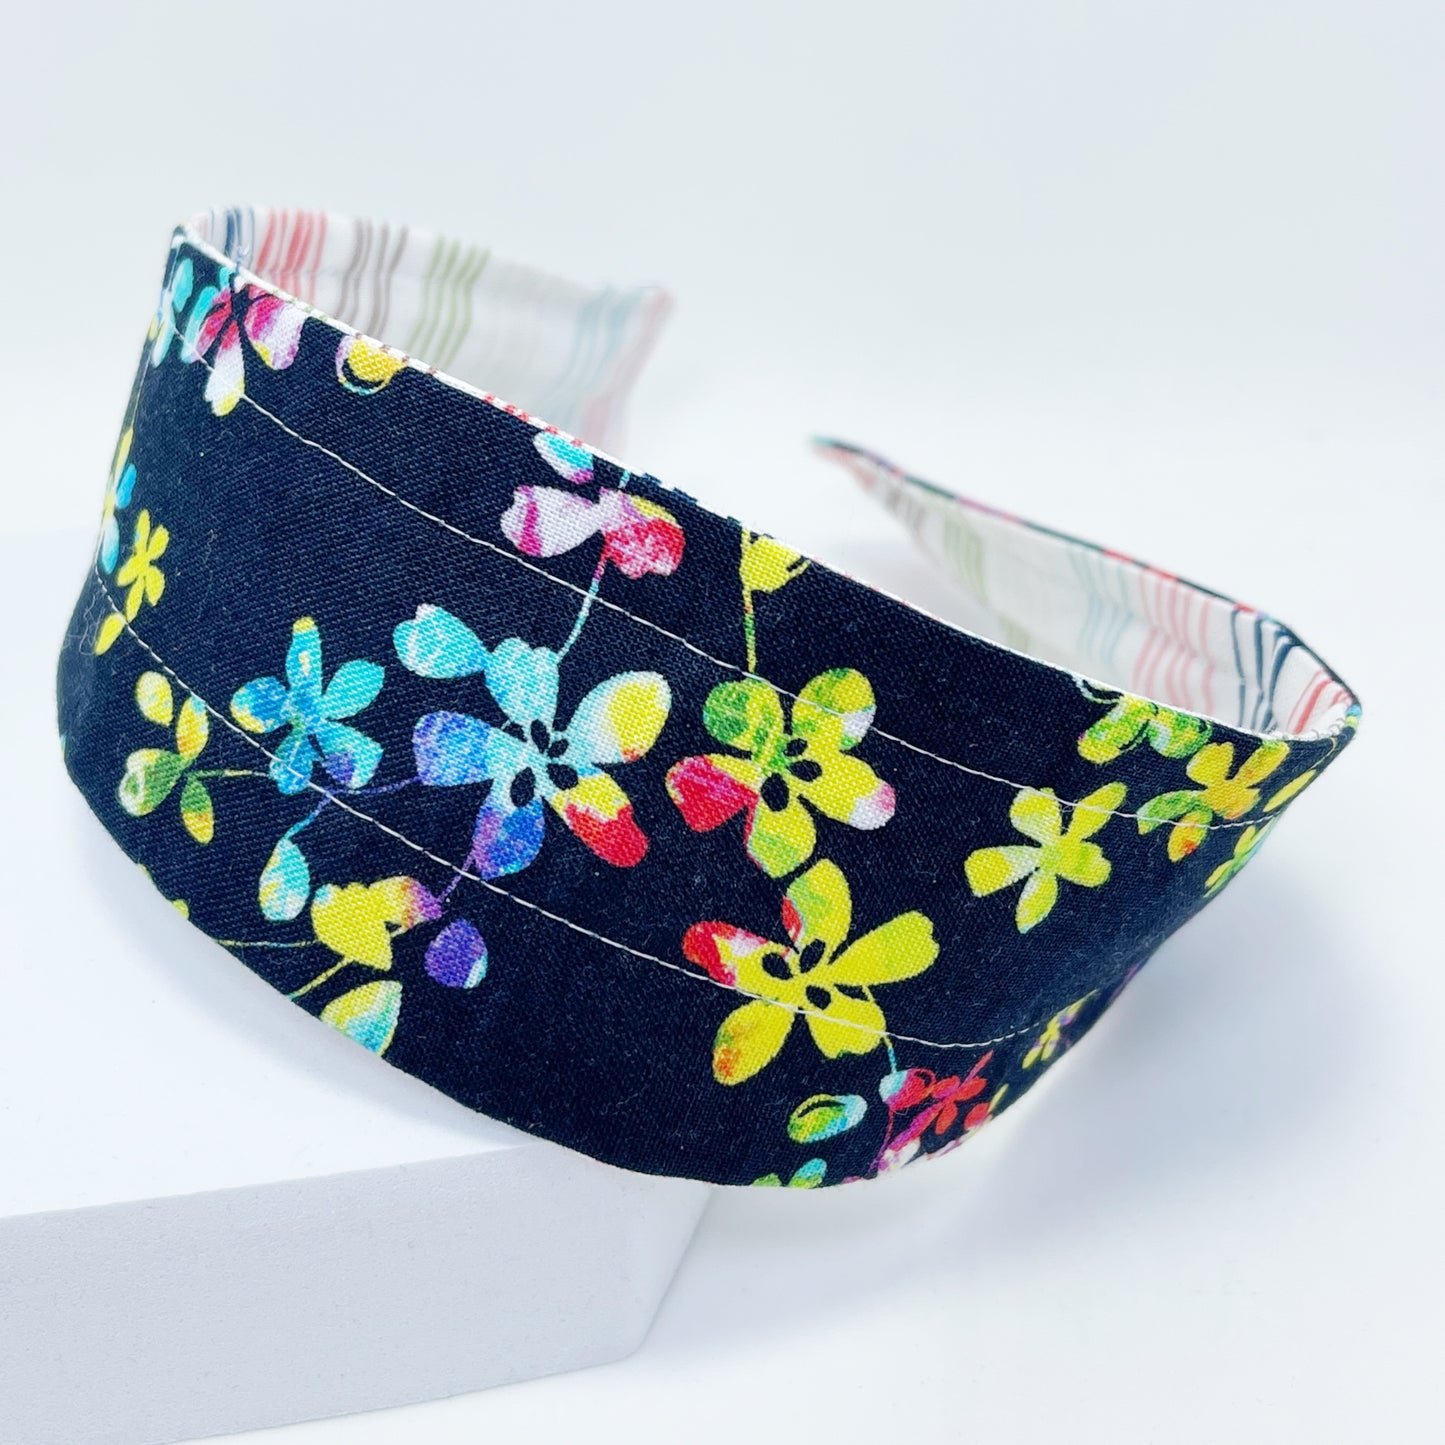 Comfortable Reversible Handmade Fabric Headband - Stripes and Bright floral on black